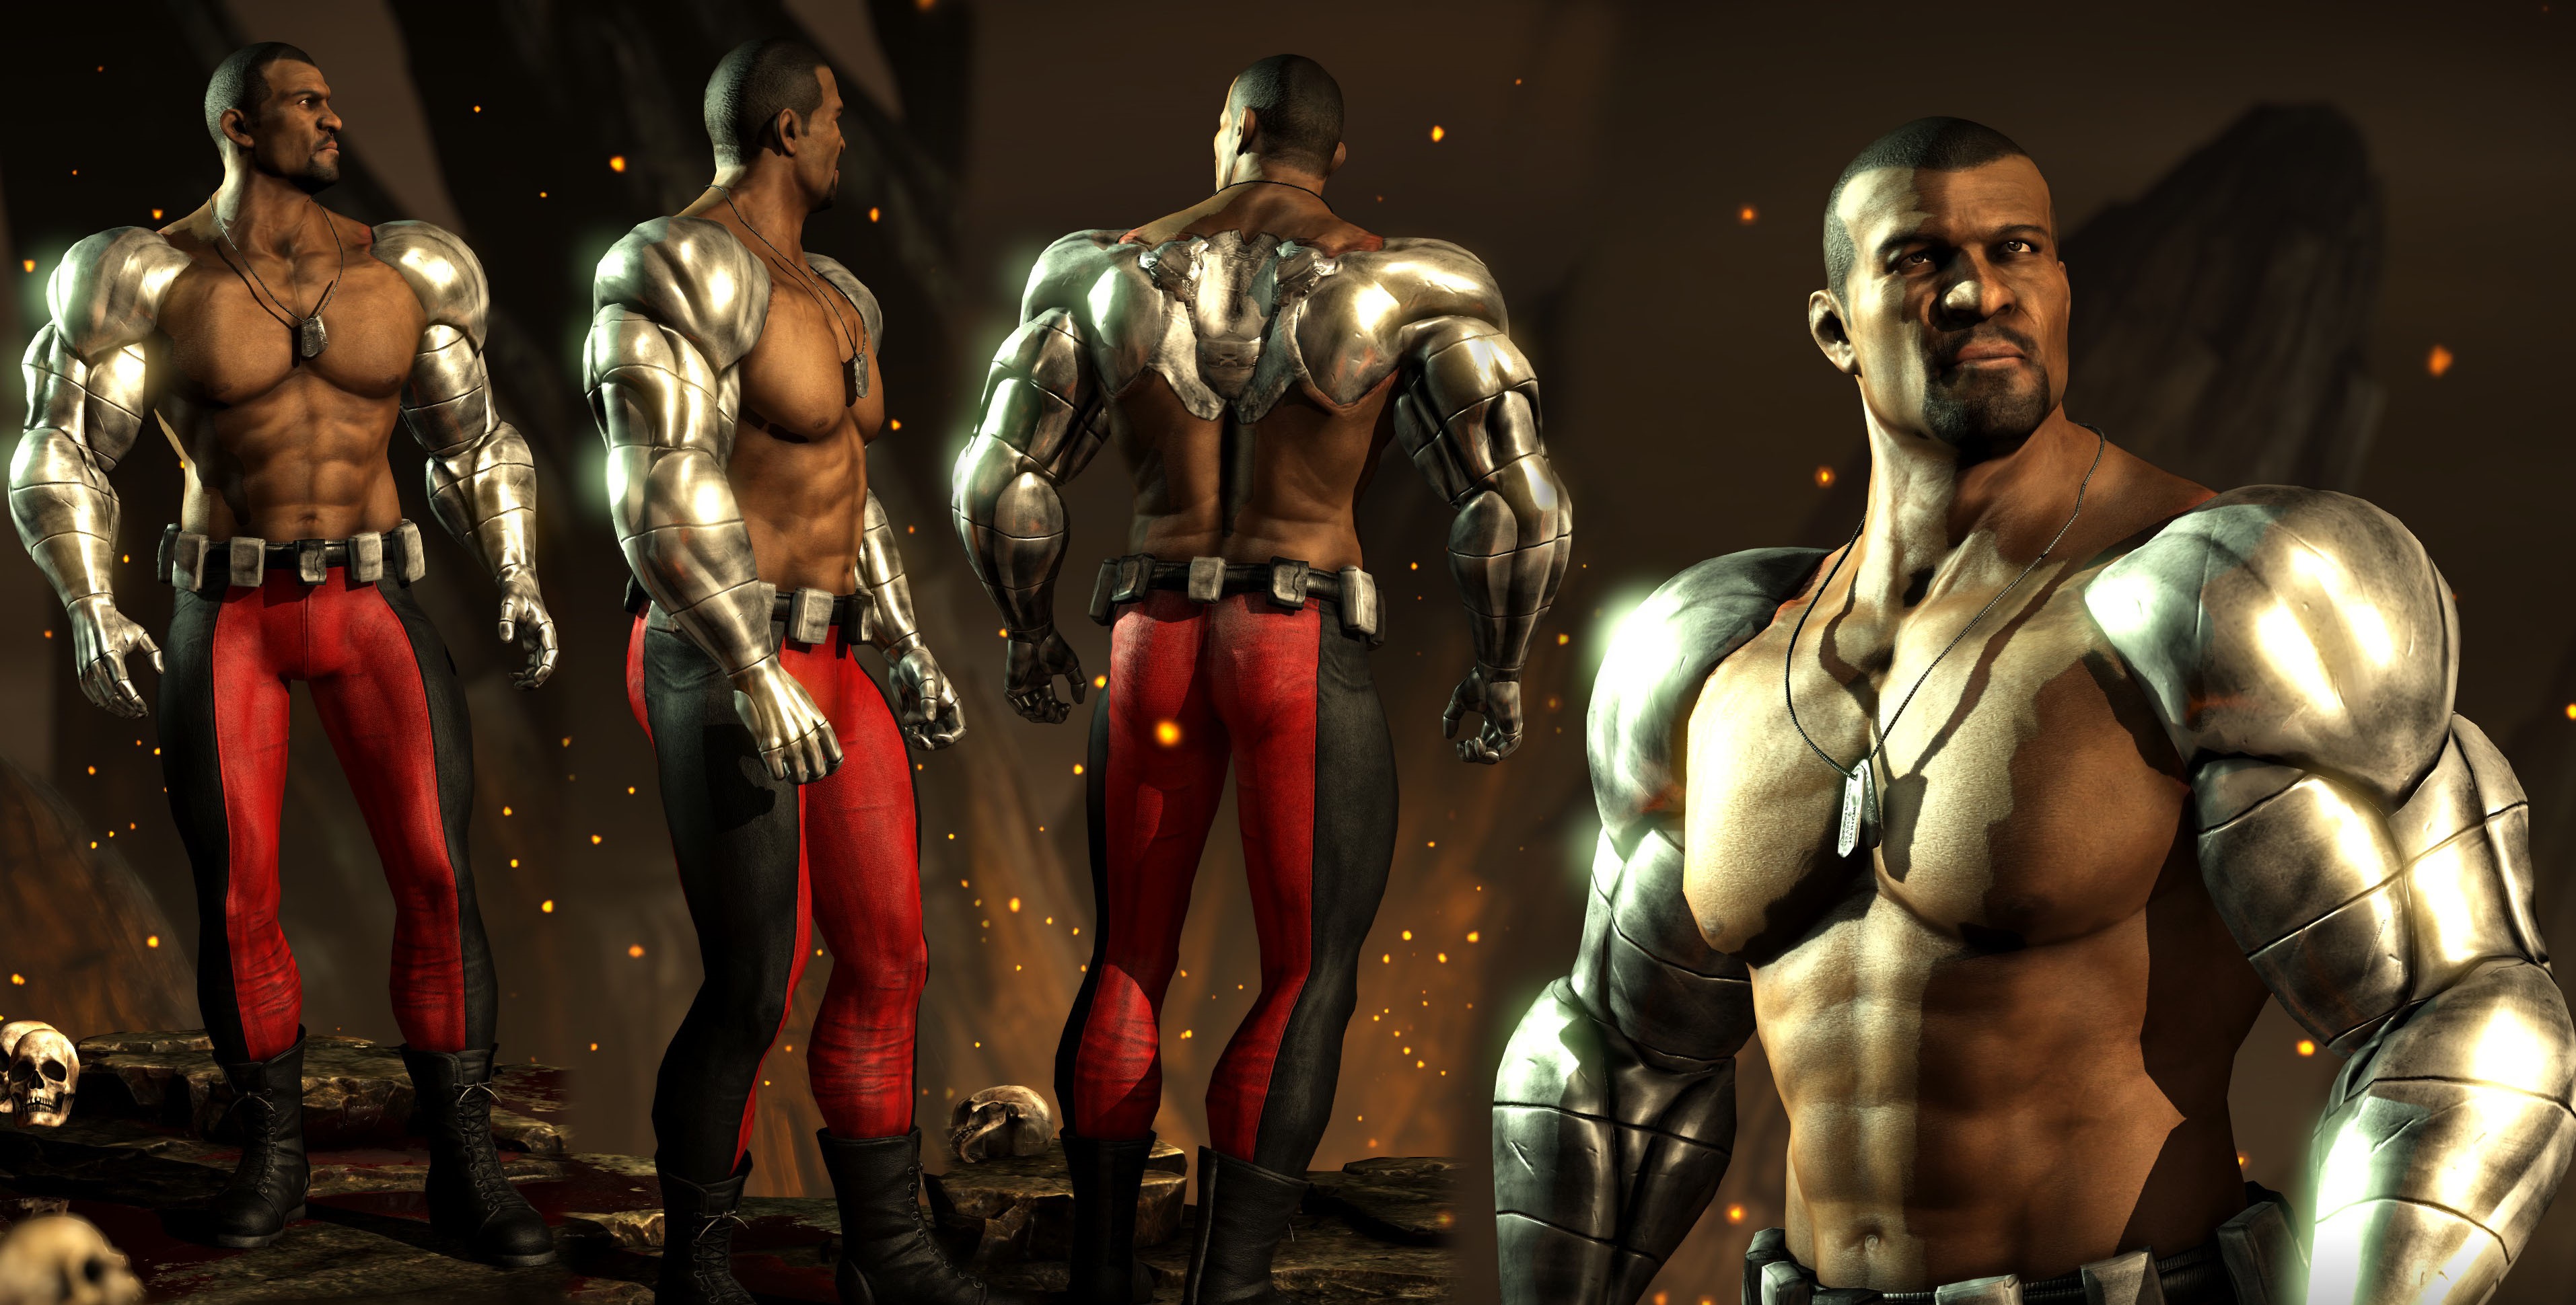 Image 3 - MKX - [ MK4 Skin Pack ] by King Kolossos mod for 